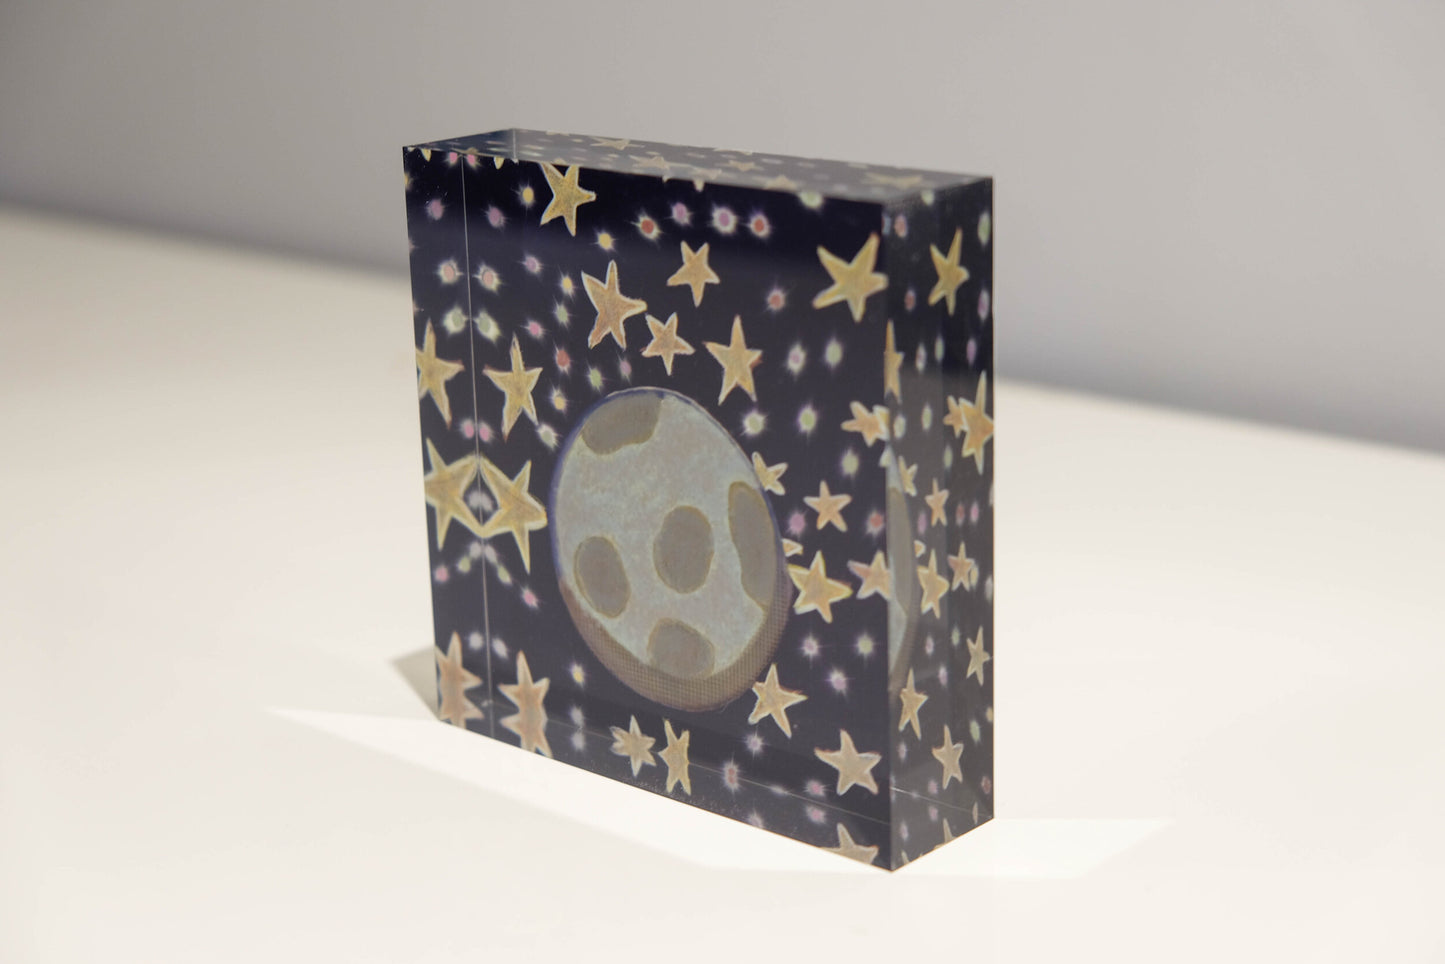 Tilted view of Acrylic block depicting outer space with a blue background and golden stars with Earth in the center